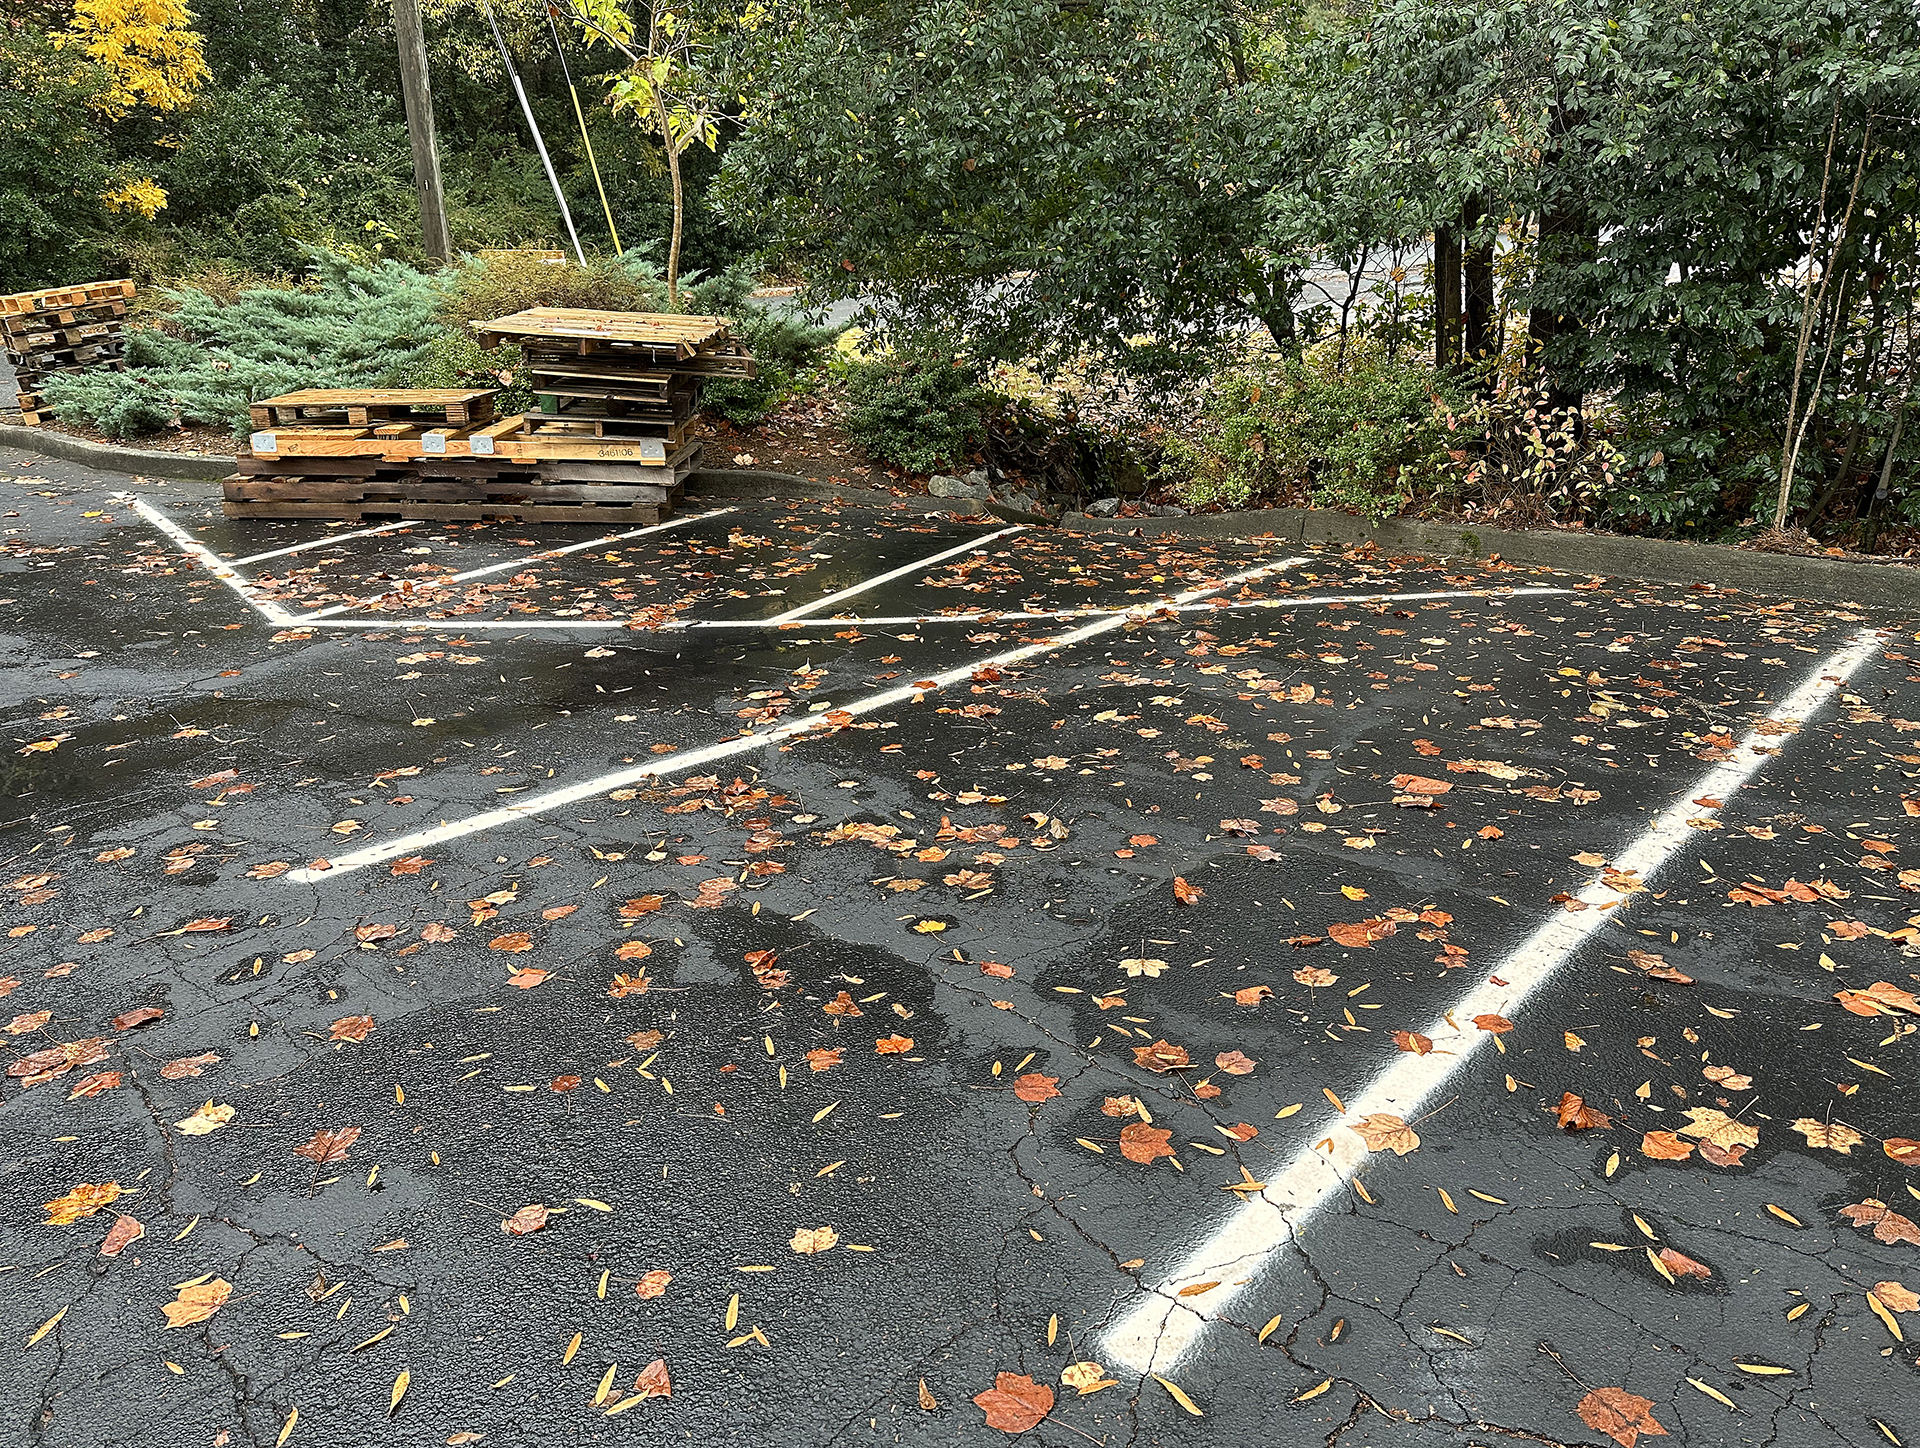 a parking lot with fallen leaves on the ground